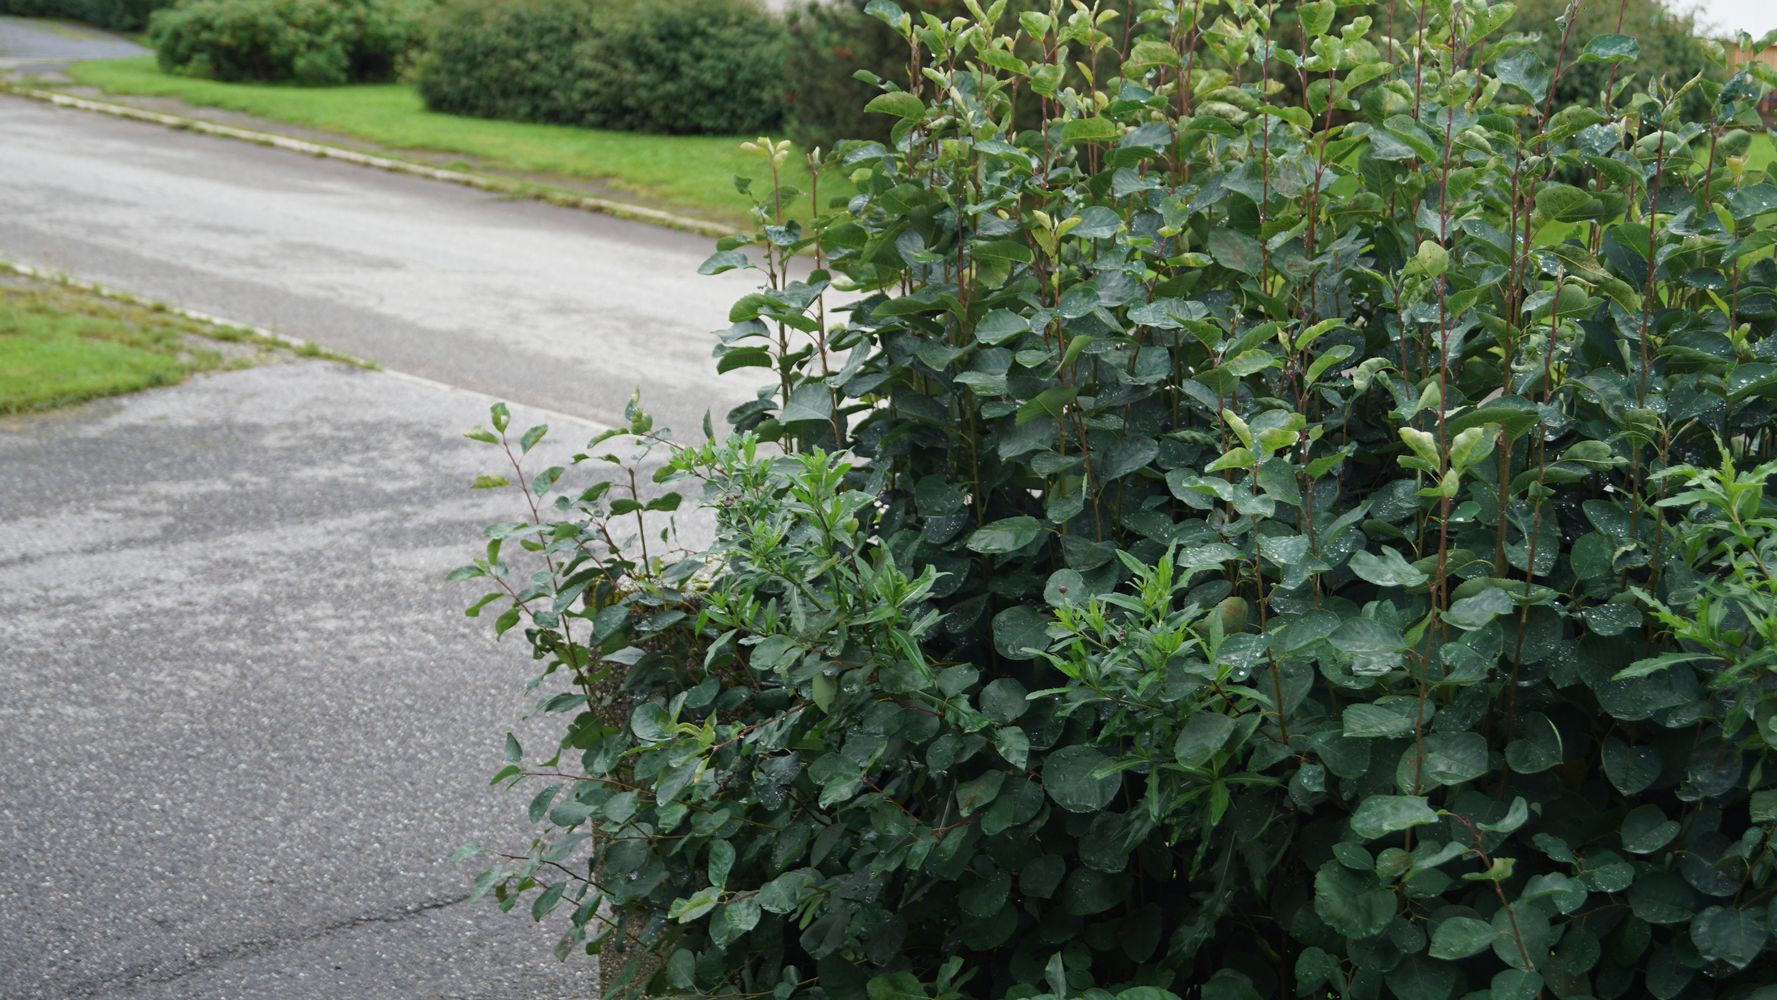 Attractive for owners – the hedge can pose a danger to traffic